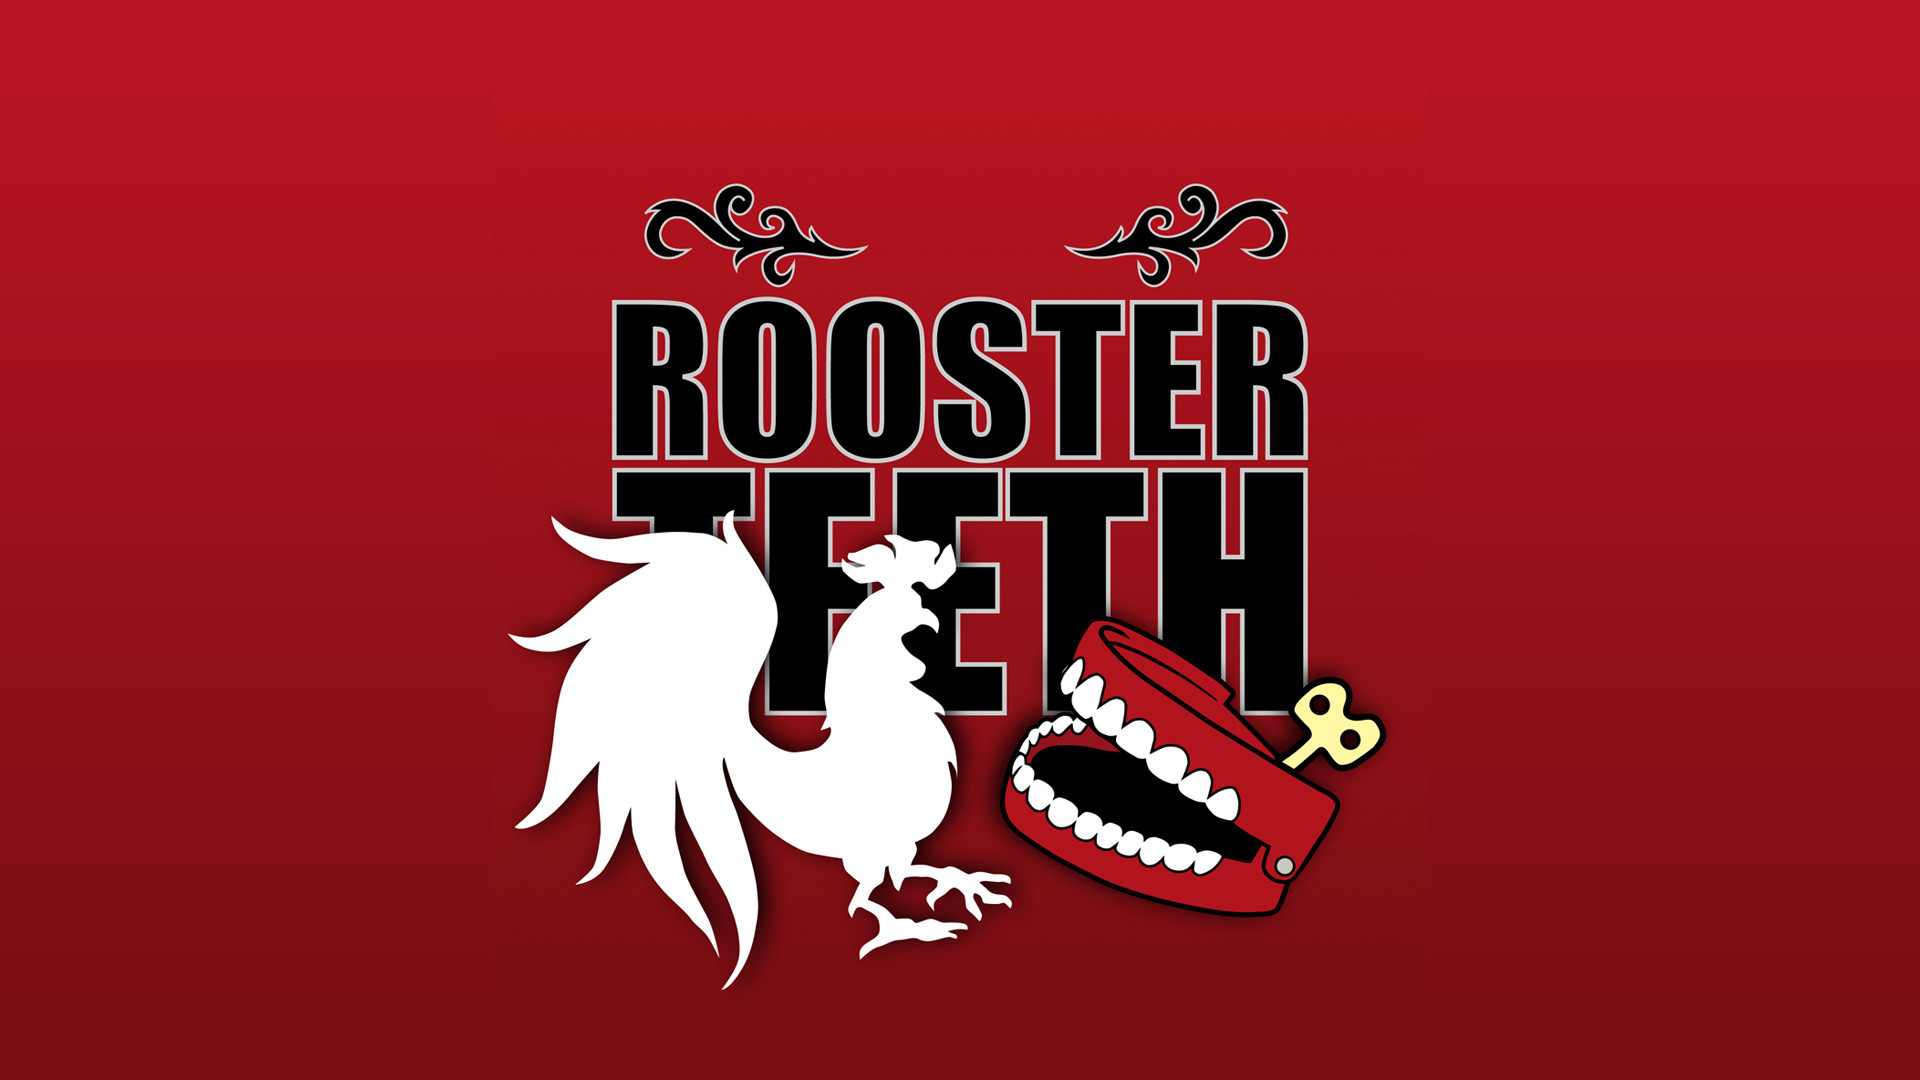 1920x1080 Rooster Teeth Connichi Micheal und Lindsay; Rooster Teeth Connichi